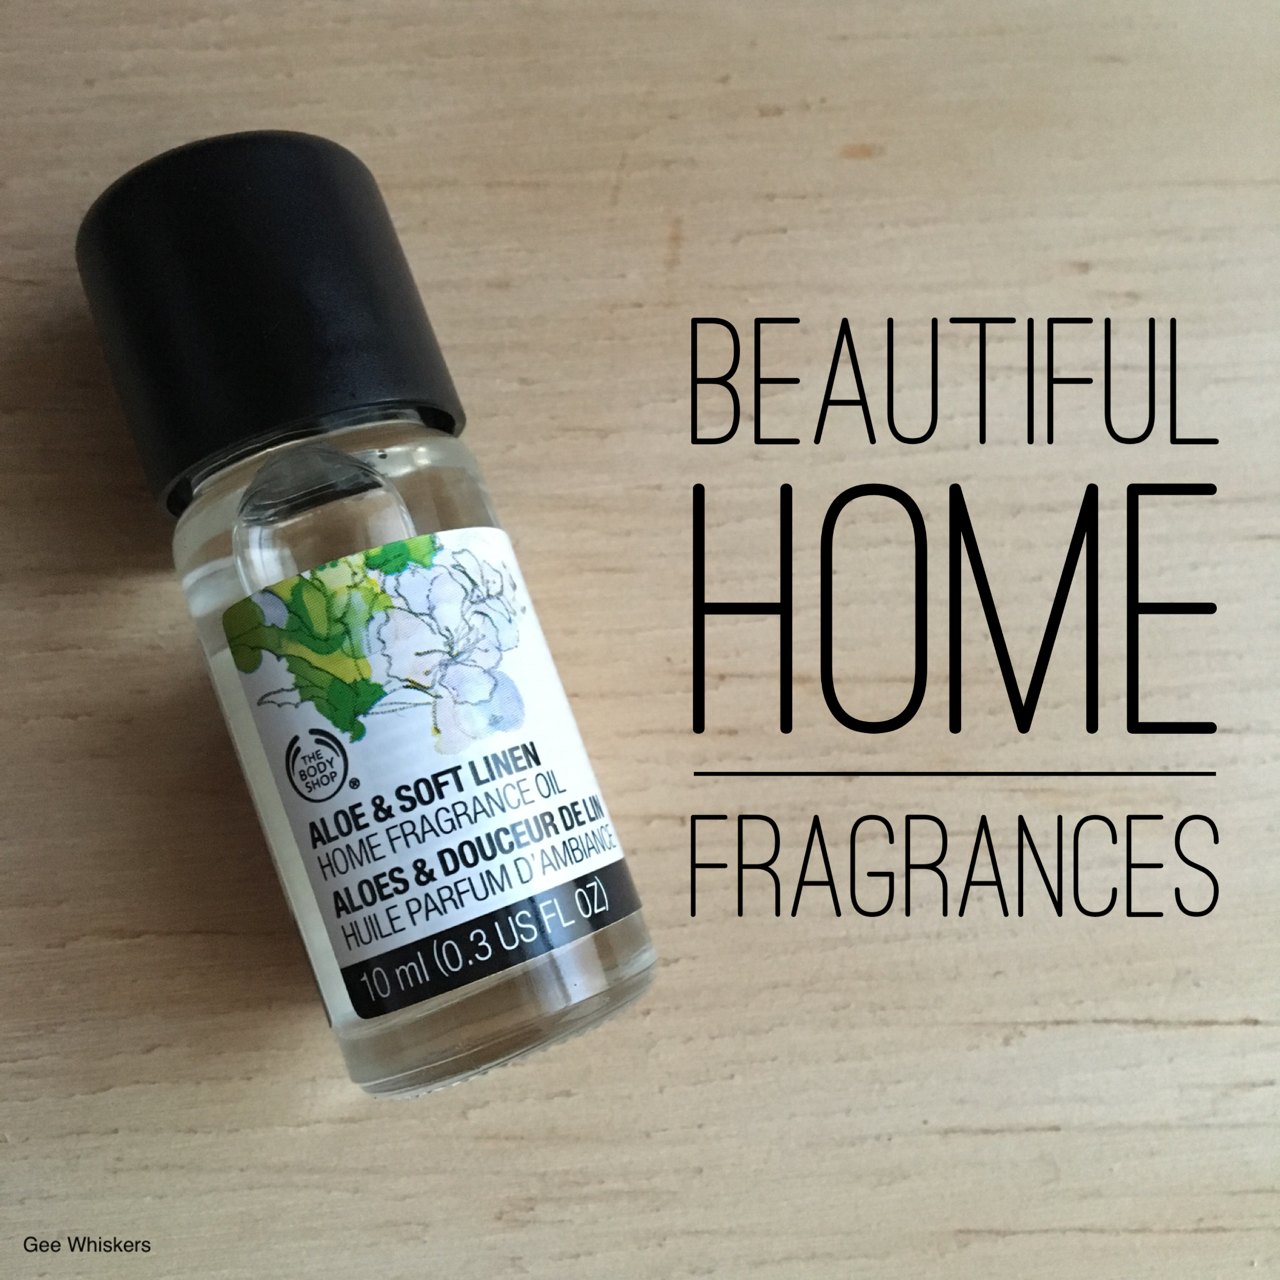 The Body Shop Home Fragrance Oil Aloe and Soft Linen